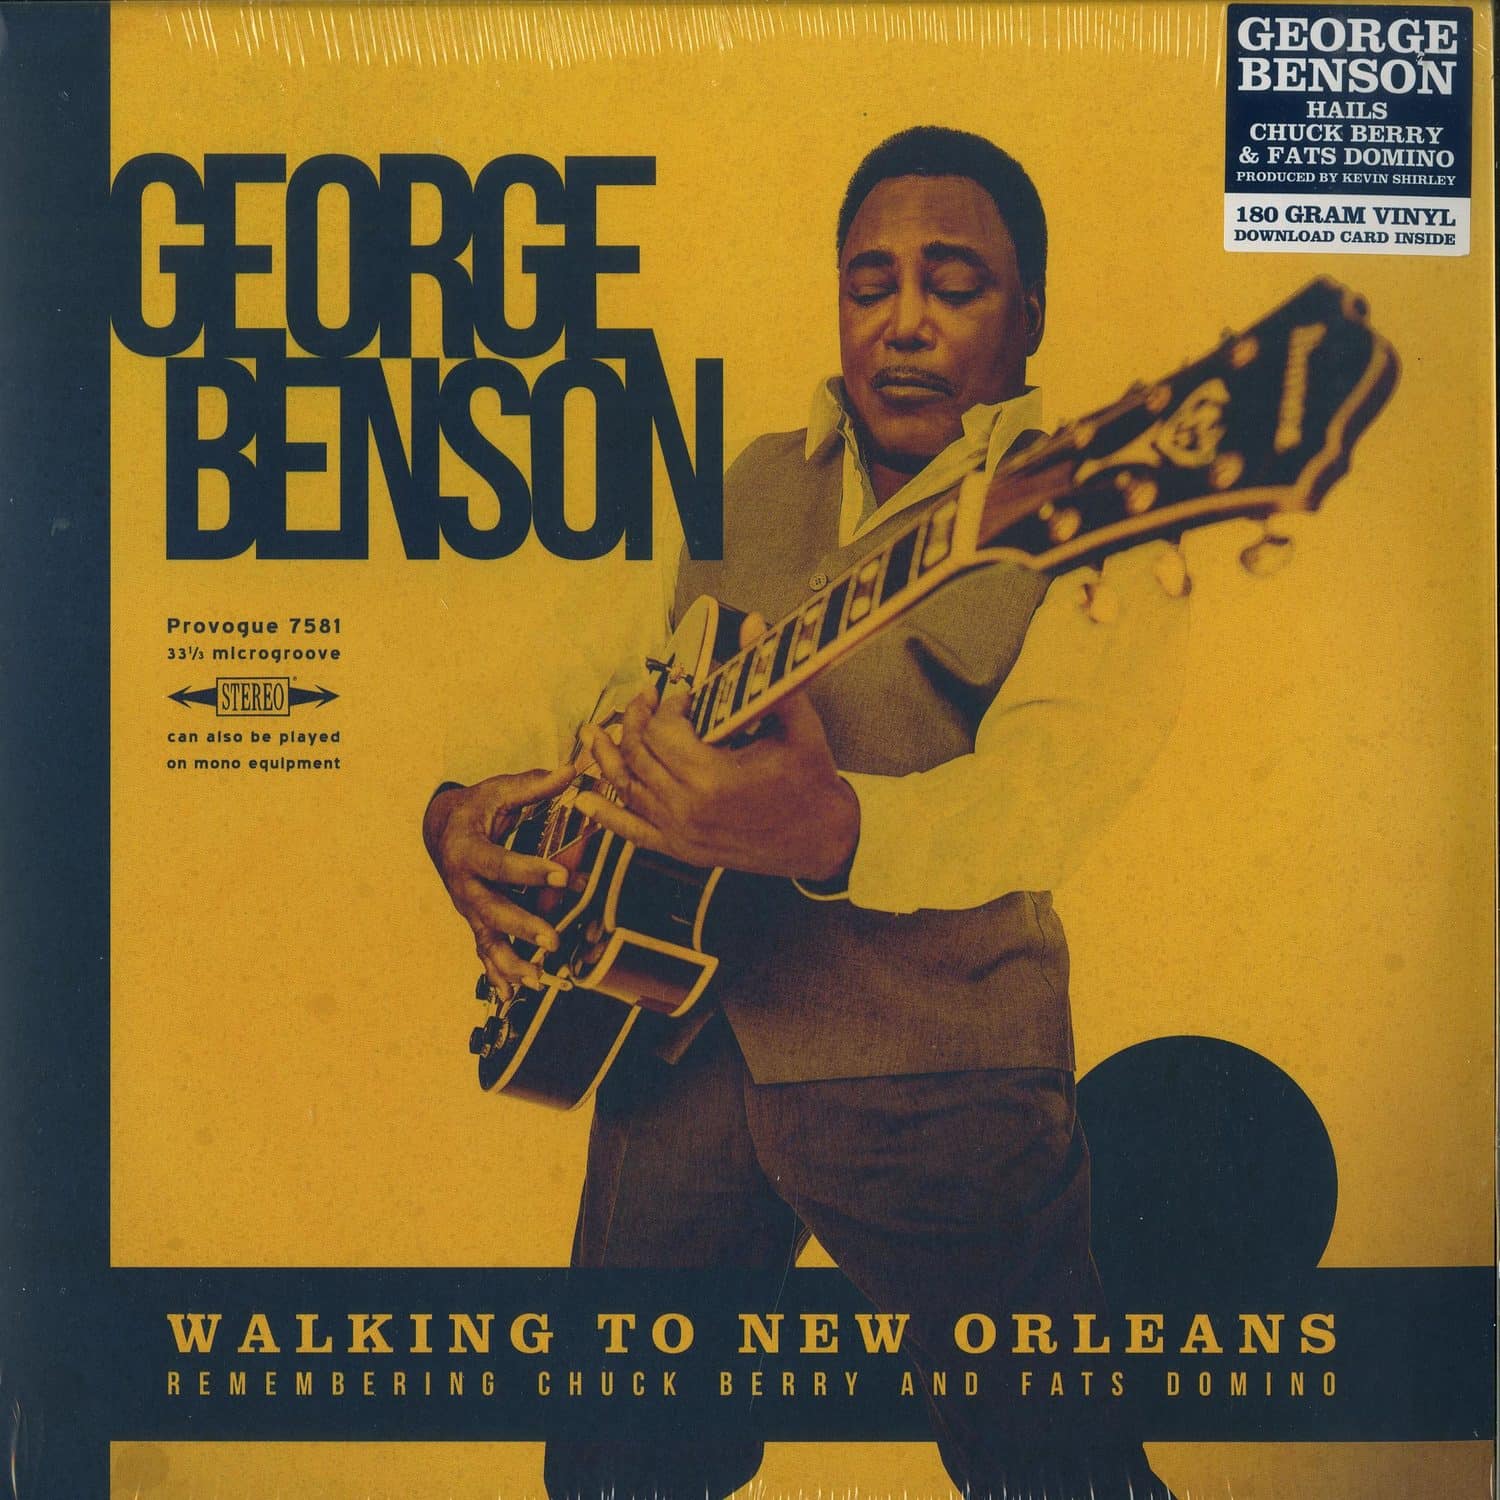 George Benson - WALKING TO NEW ORLEANS 